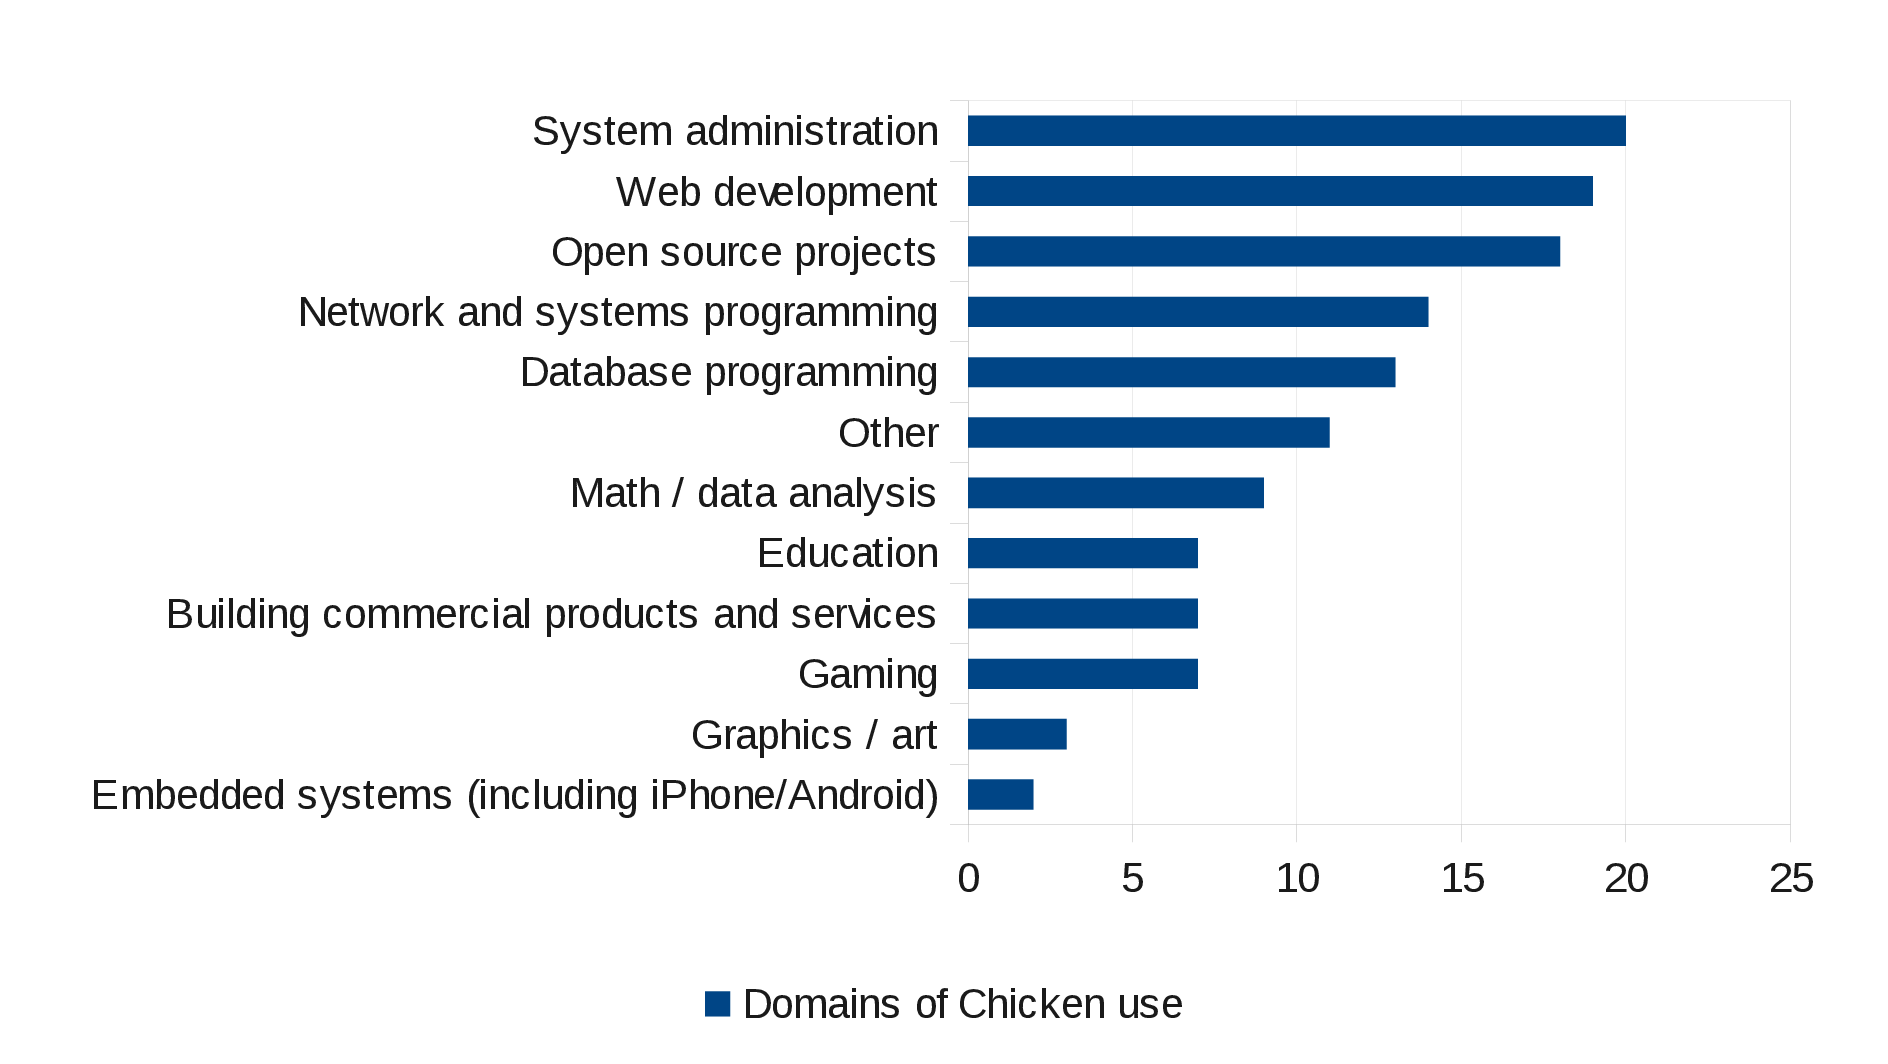 Domains of CHICKEN use